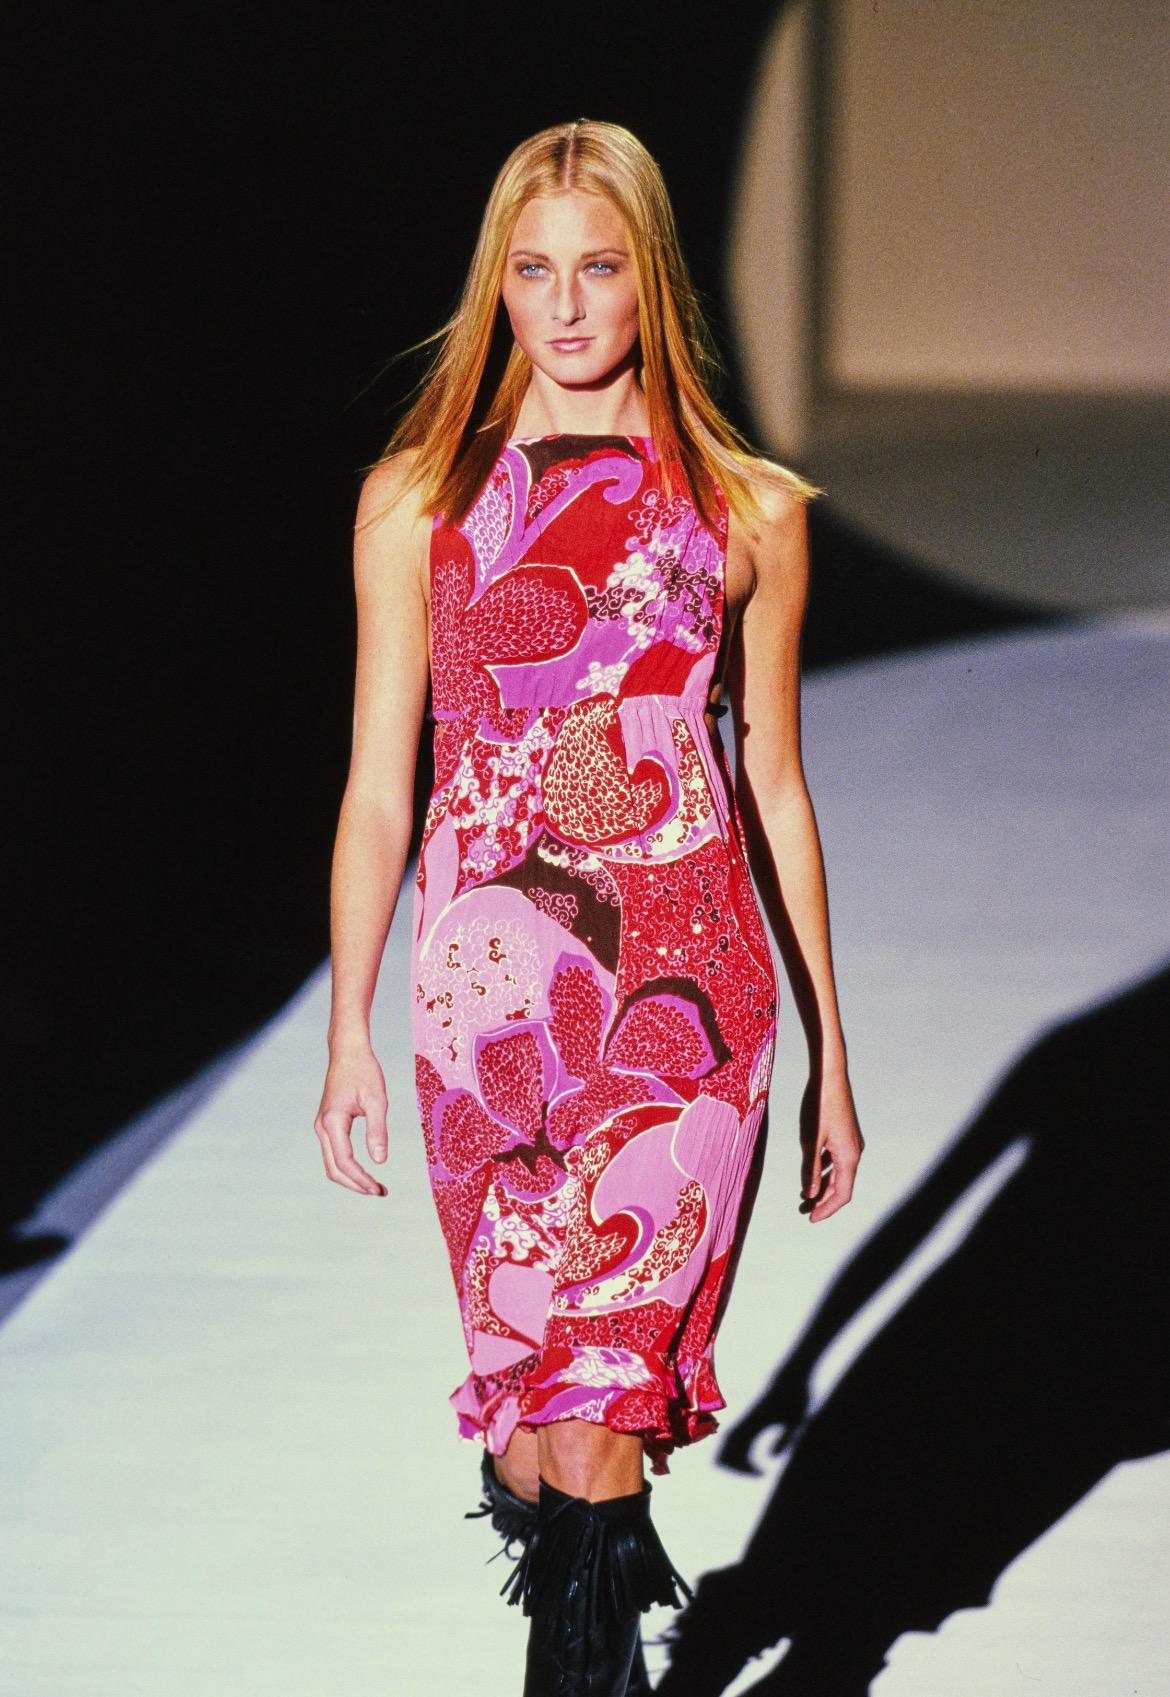 Presenting a bright floral Gucci dress, designed by Tom Ford. From the Spring/Summer 1999 collection, this dress debuted on the season's runway as look number 9, modeled by Maggie Rizer. This dress features Ford's bright red and pink 'acid flower'